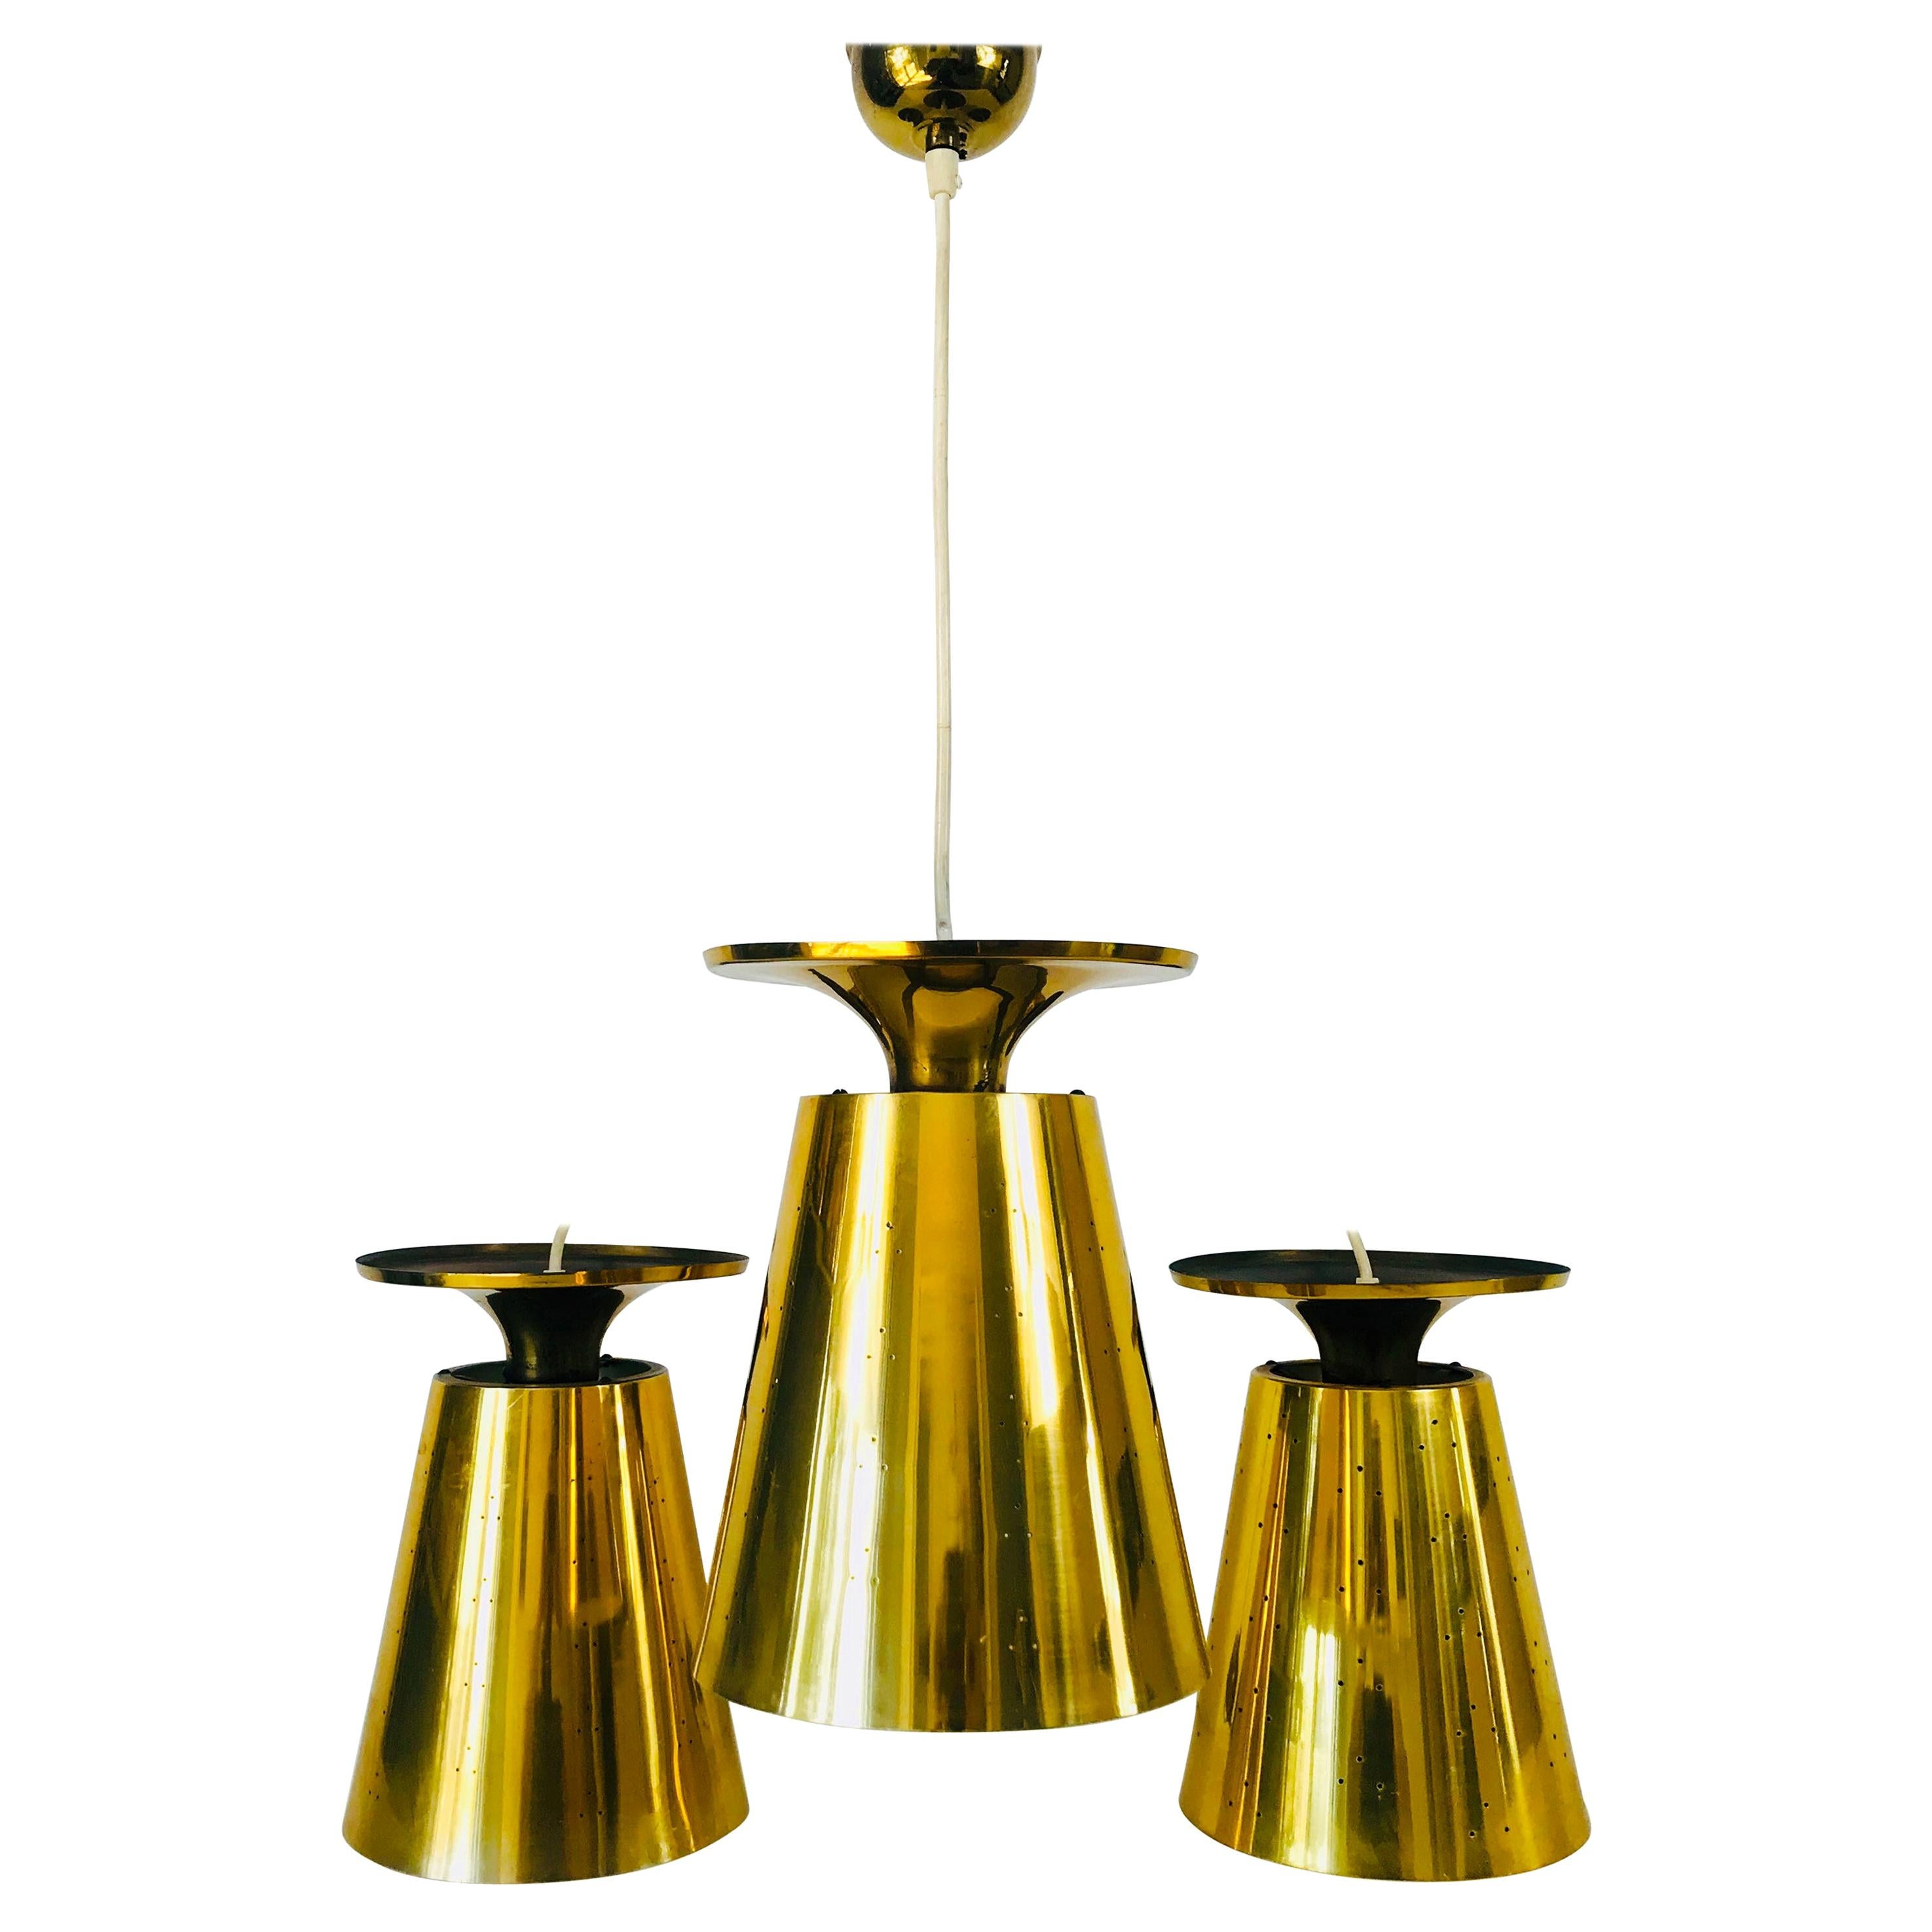 Set of 3 Polished Brass Pendant Lamps Attributed to Paavo Tynell, 1950s